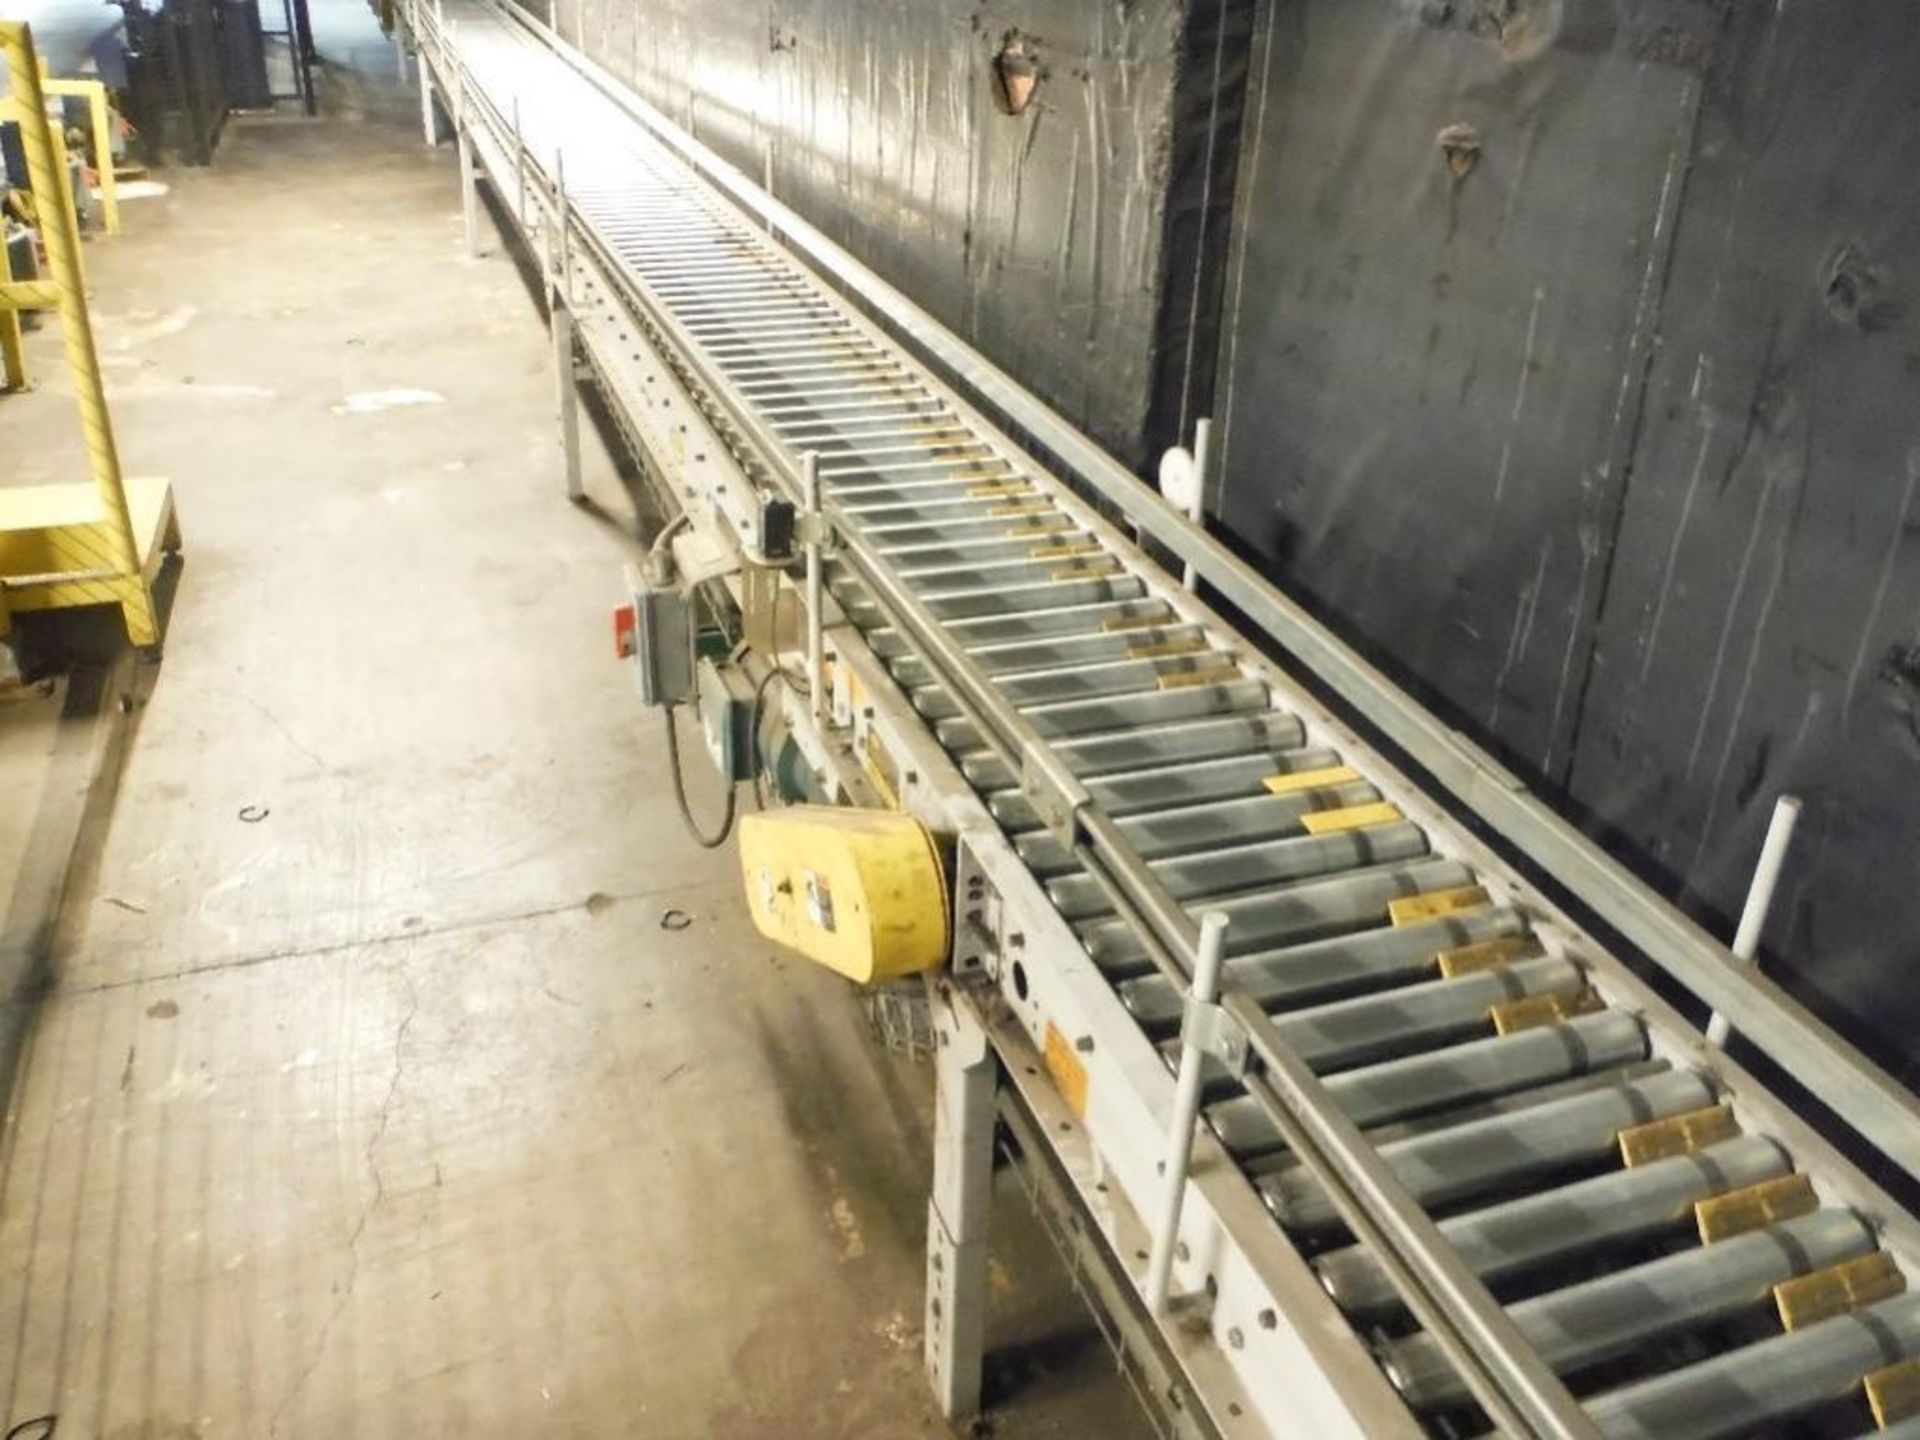 Hytrol powered roller conveyor, 80 ft. L x 15 in. W x 30 in. H, 3 drives. - RIGGING FEE FOR DOMESTIC - Image 4 of 6